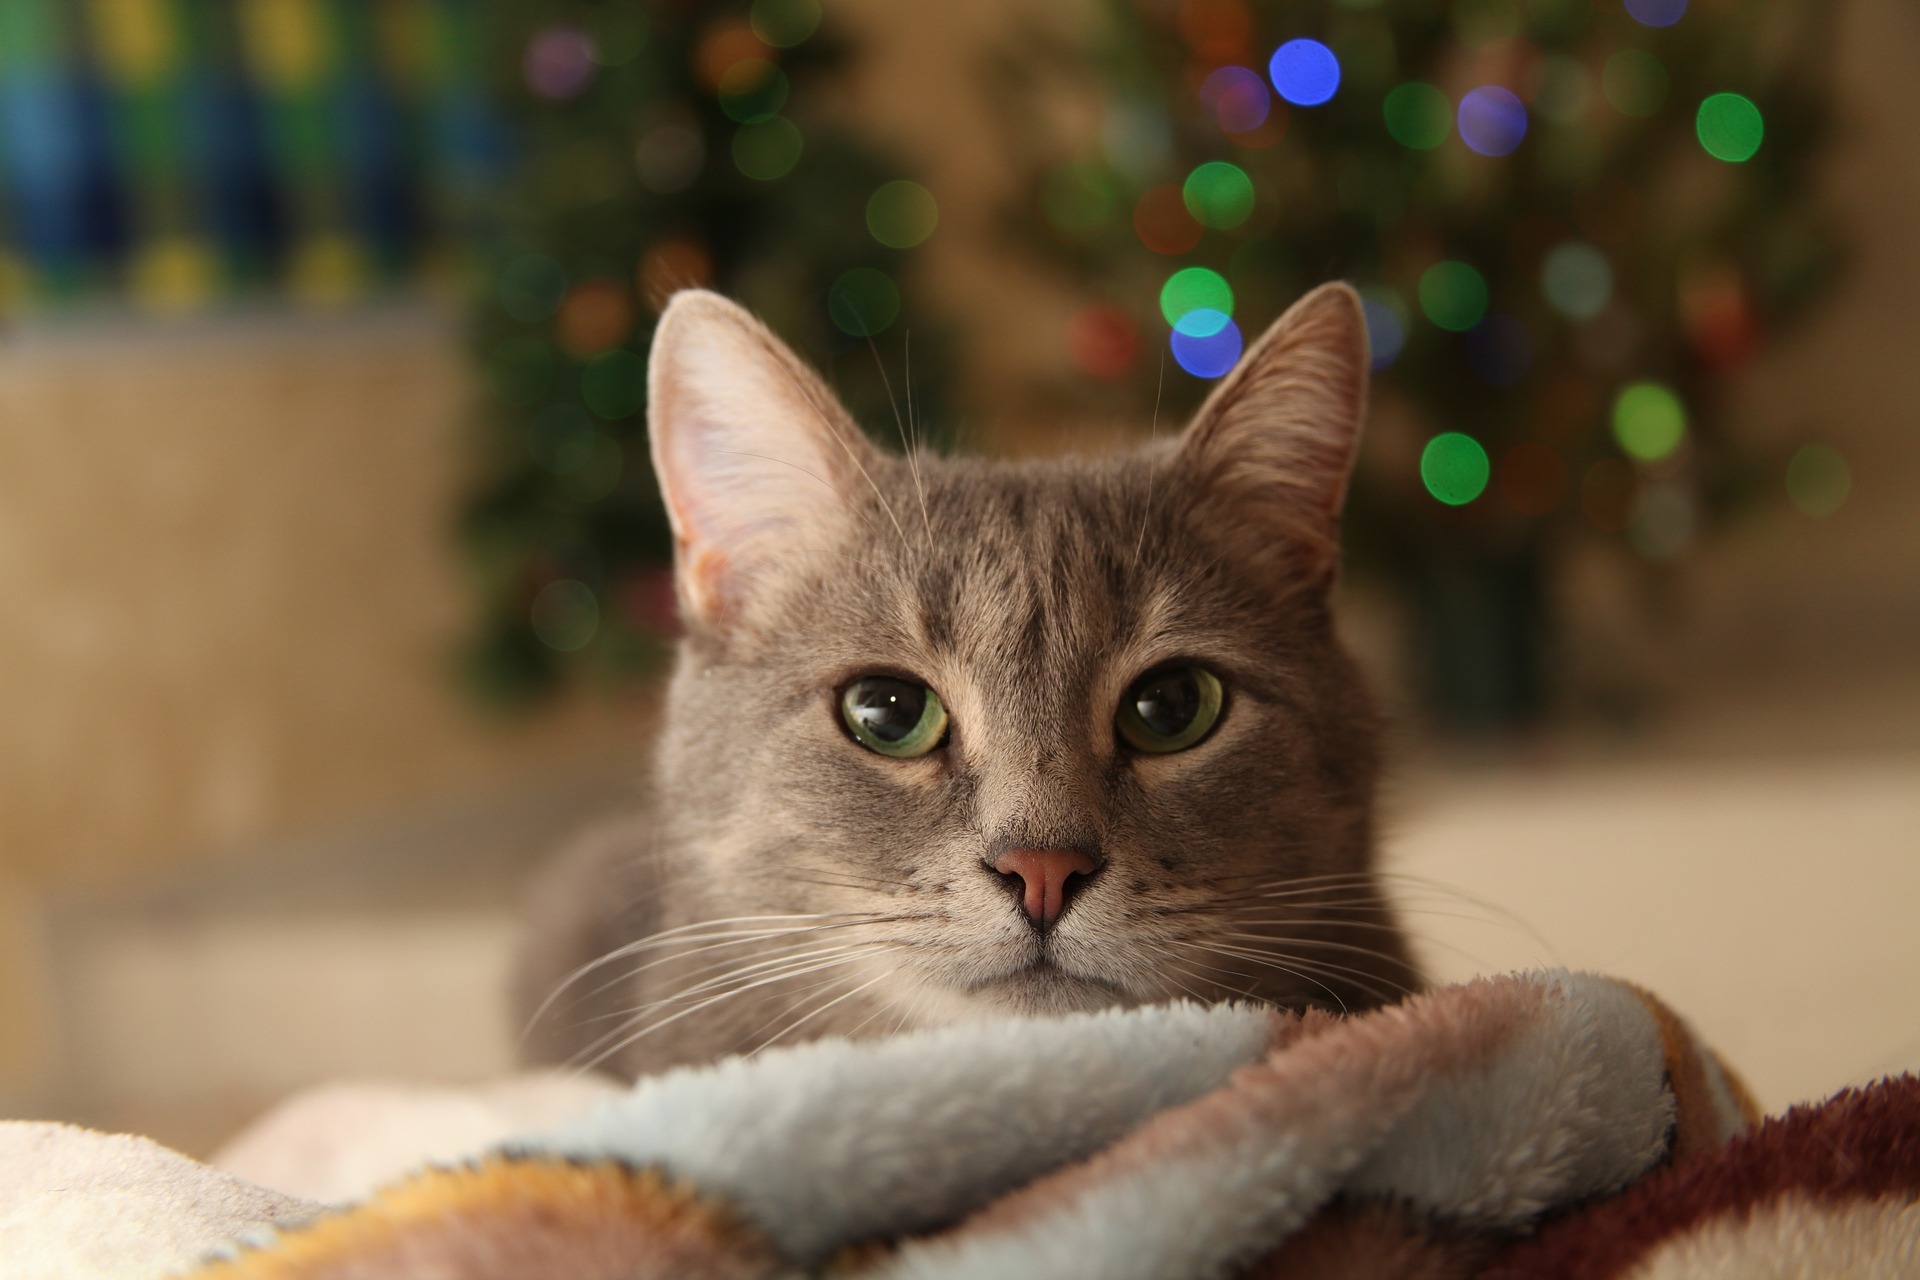 Image: Cat, red, muzzle, whiskers, eyes, green, plaid, lying down, warm, lights, holiday